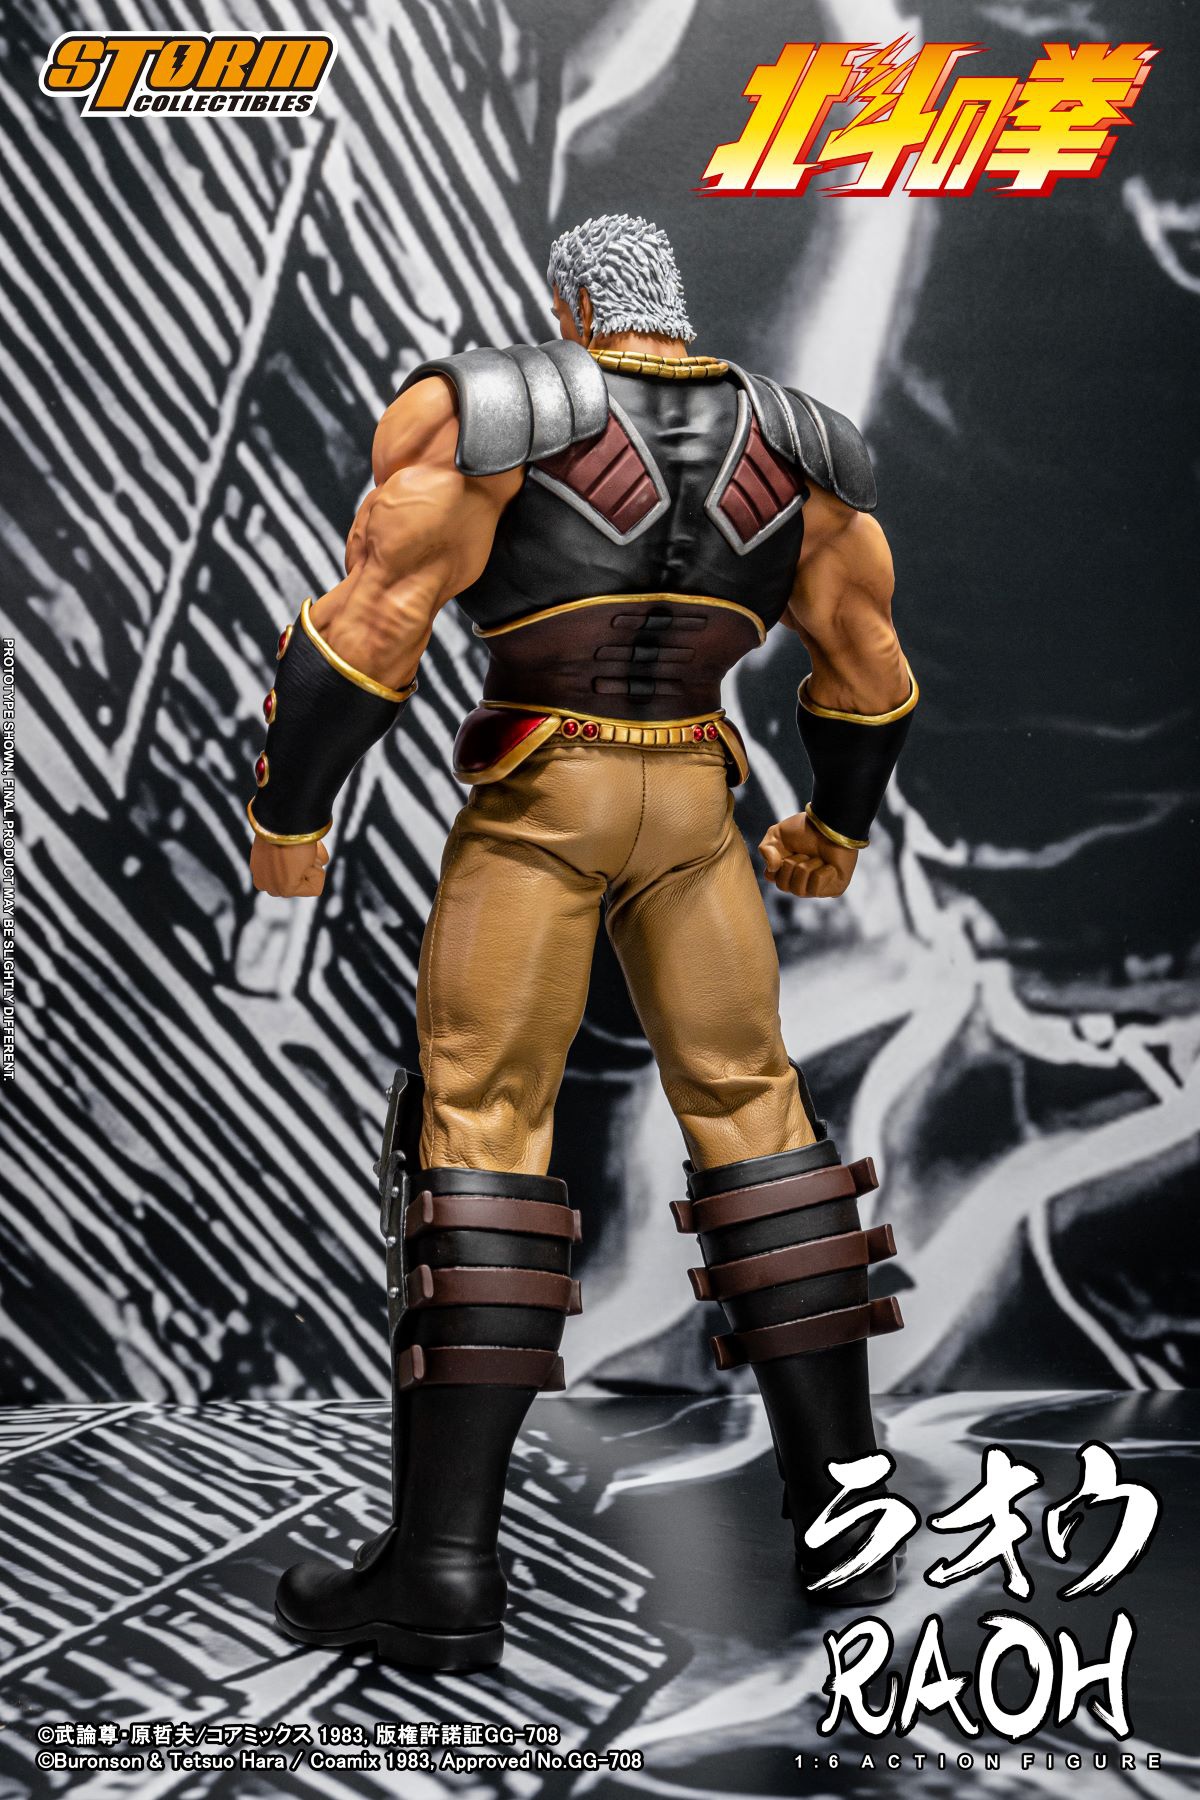 FistOfTheNorthStar - NEW PRODUCT: Storm Collectibles - "Fist of the North Star" RAOH 04139